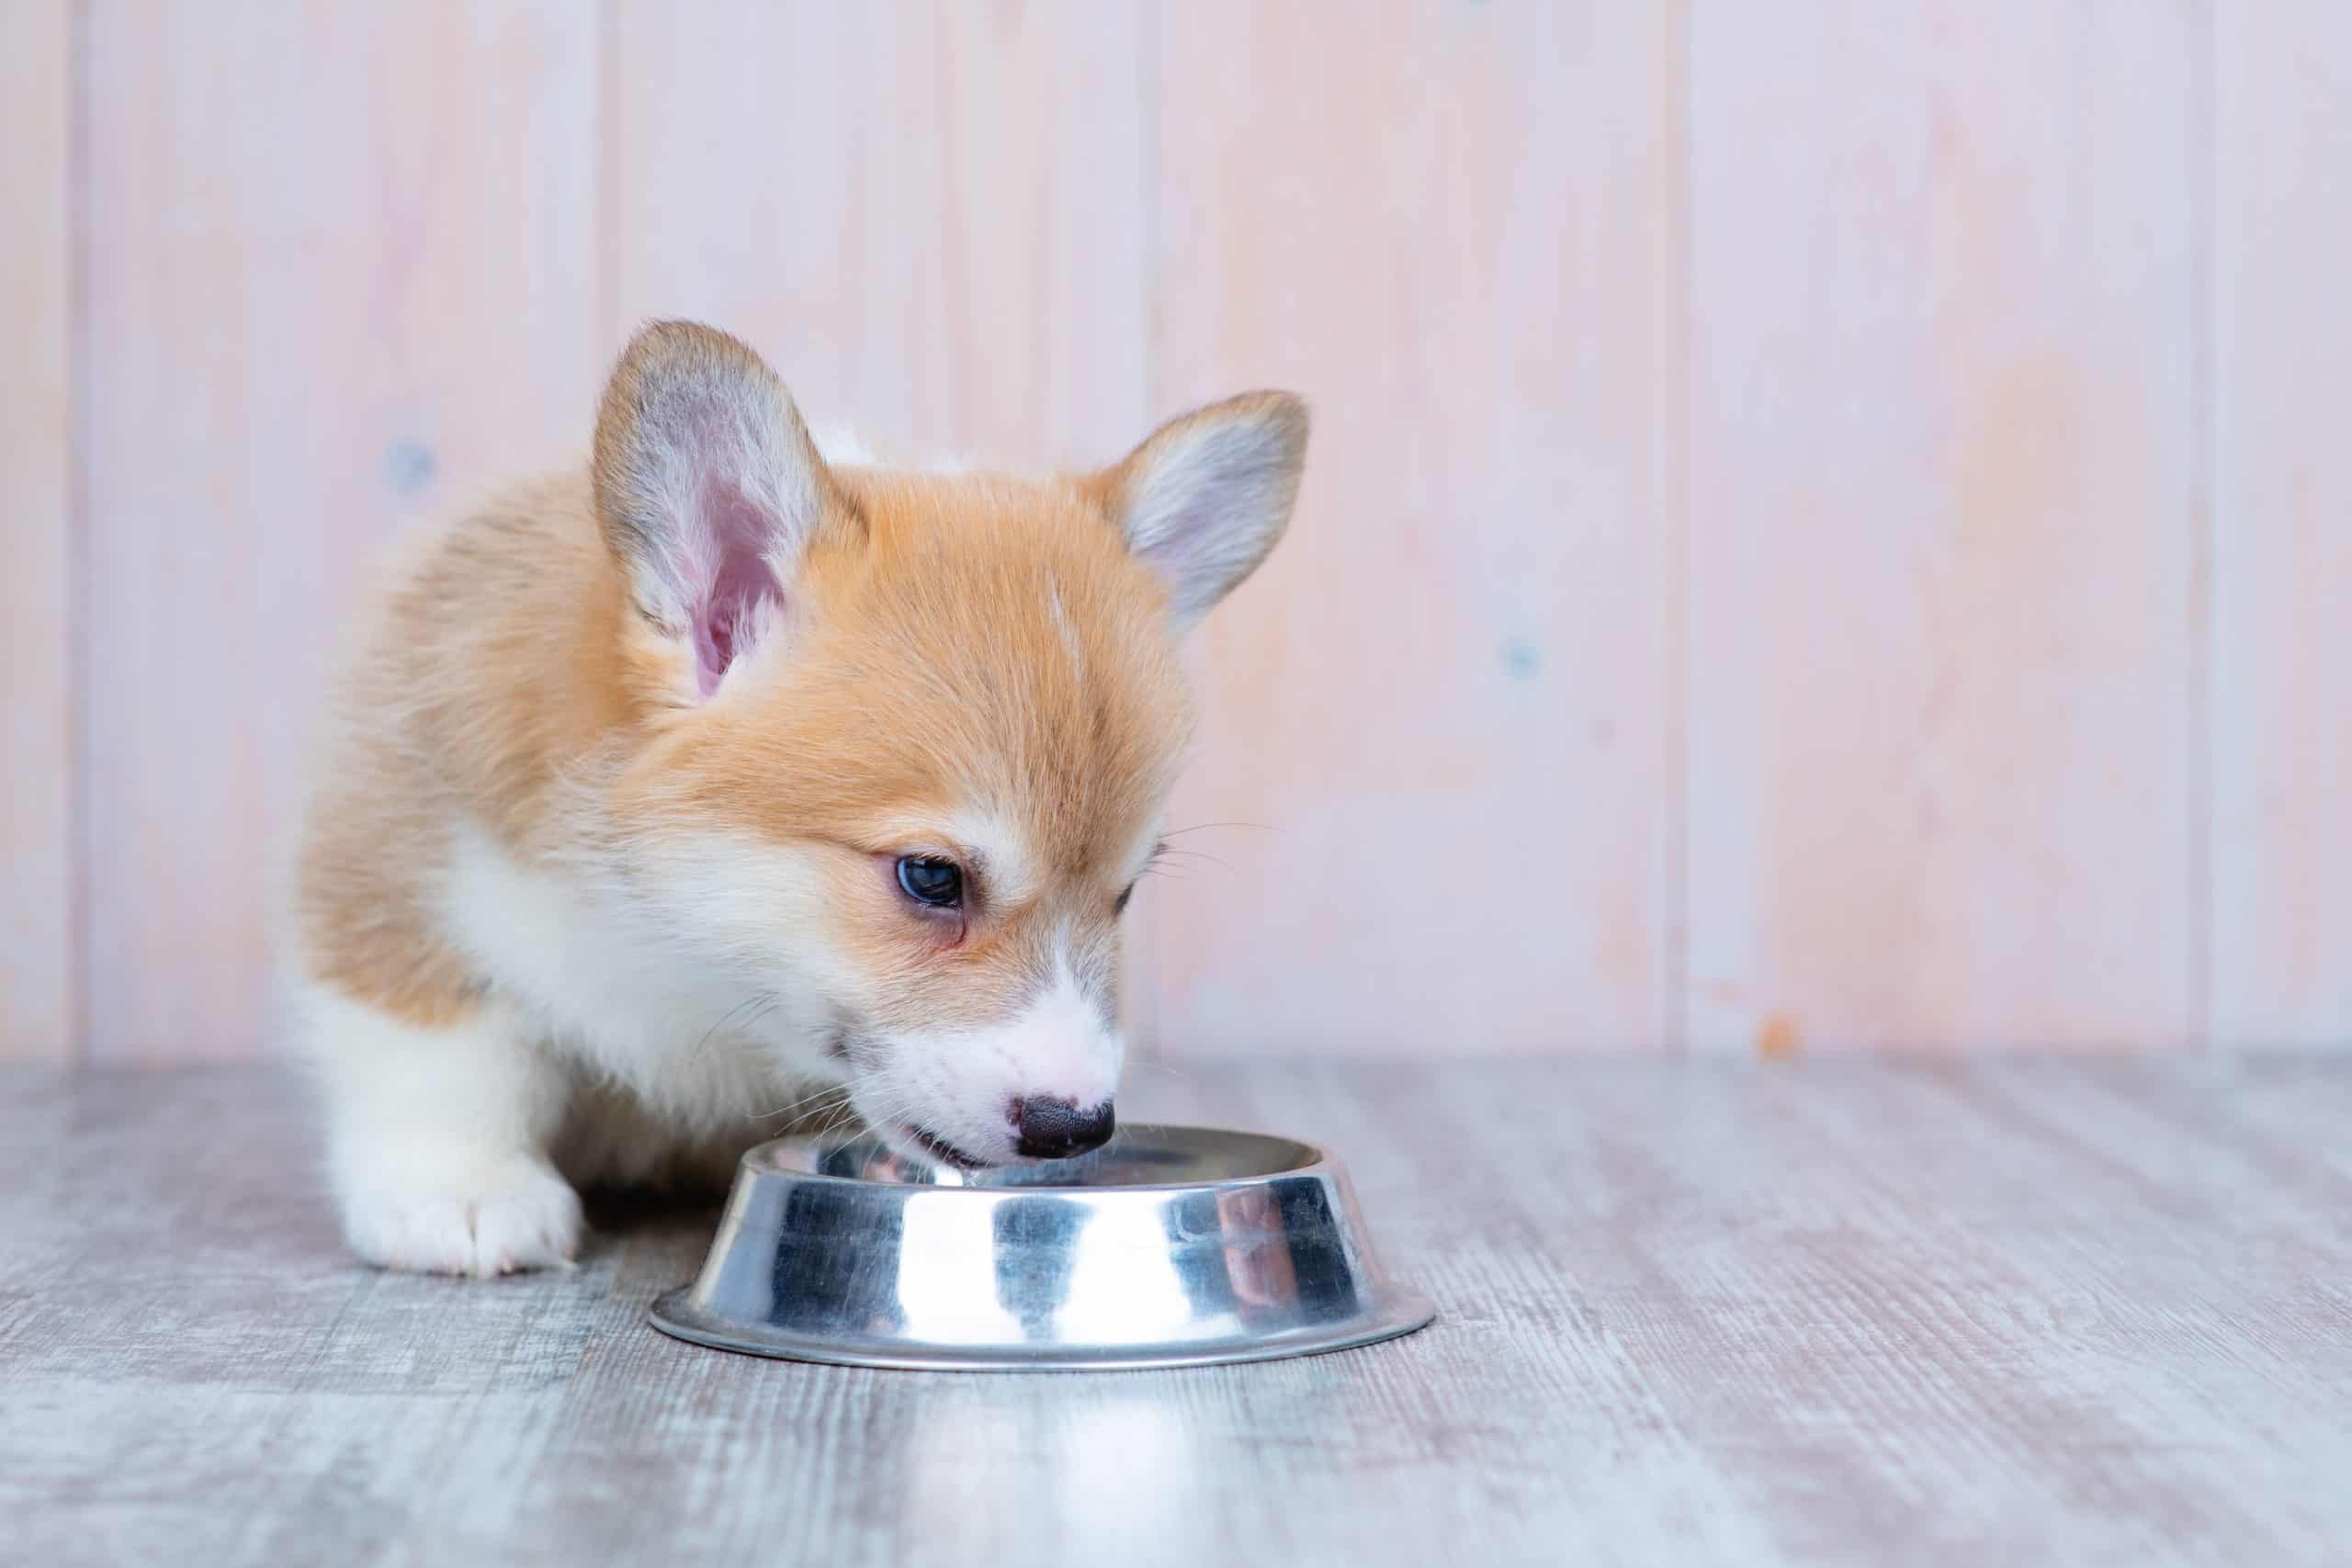 Corgi puppy eats from metal bowl. Feeding your puppy: Knowing when and how much to feed your new fur baby is key to providing proper care for your dog.